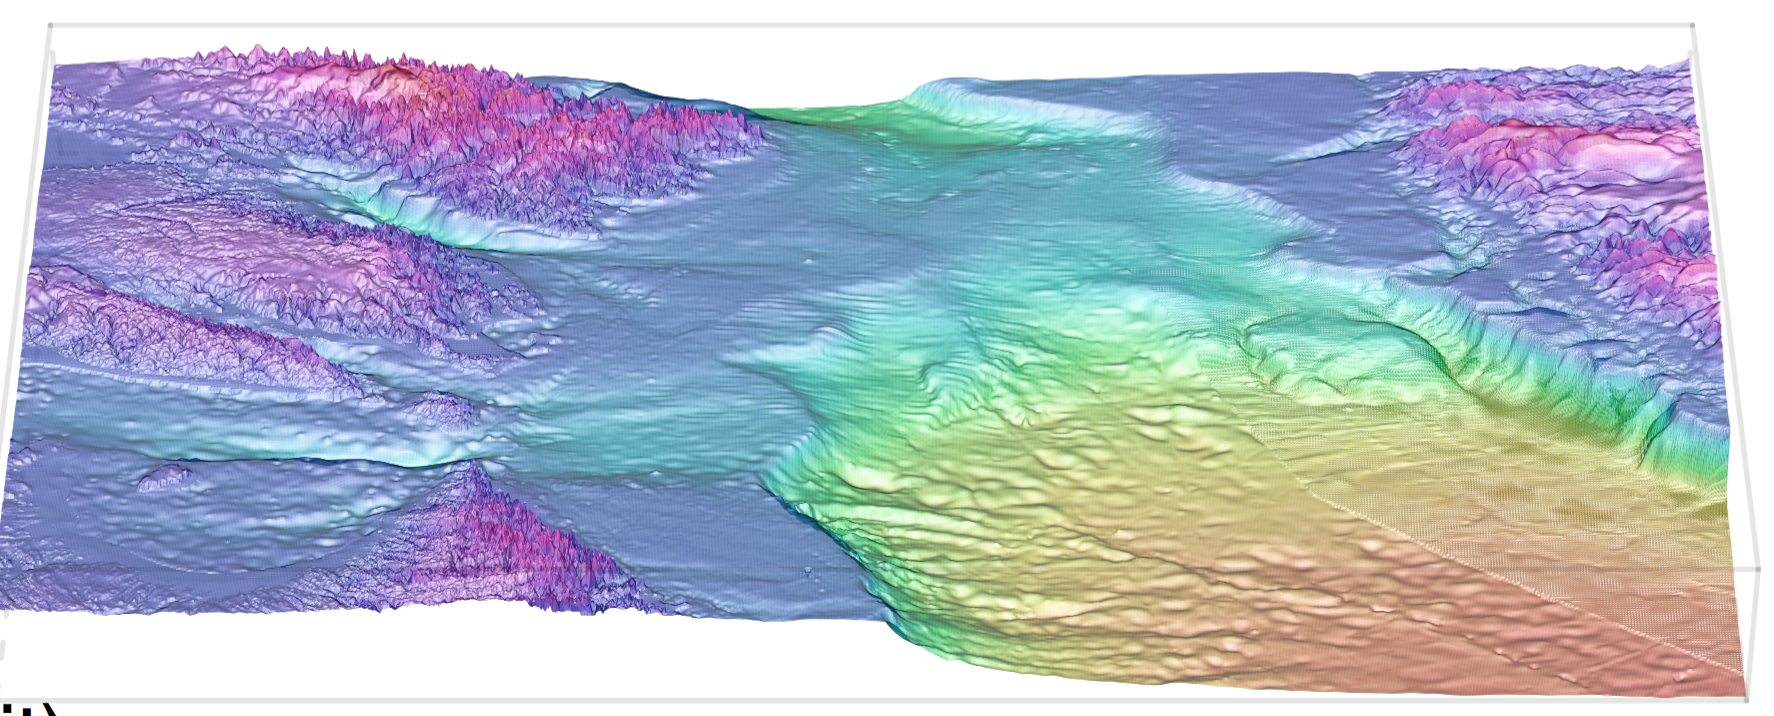 3D representation of the threshold and slope in the Davis strait.